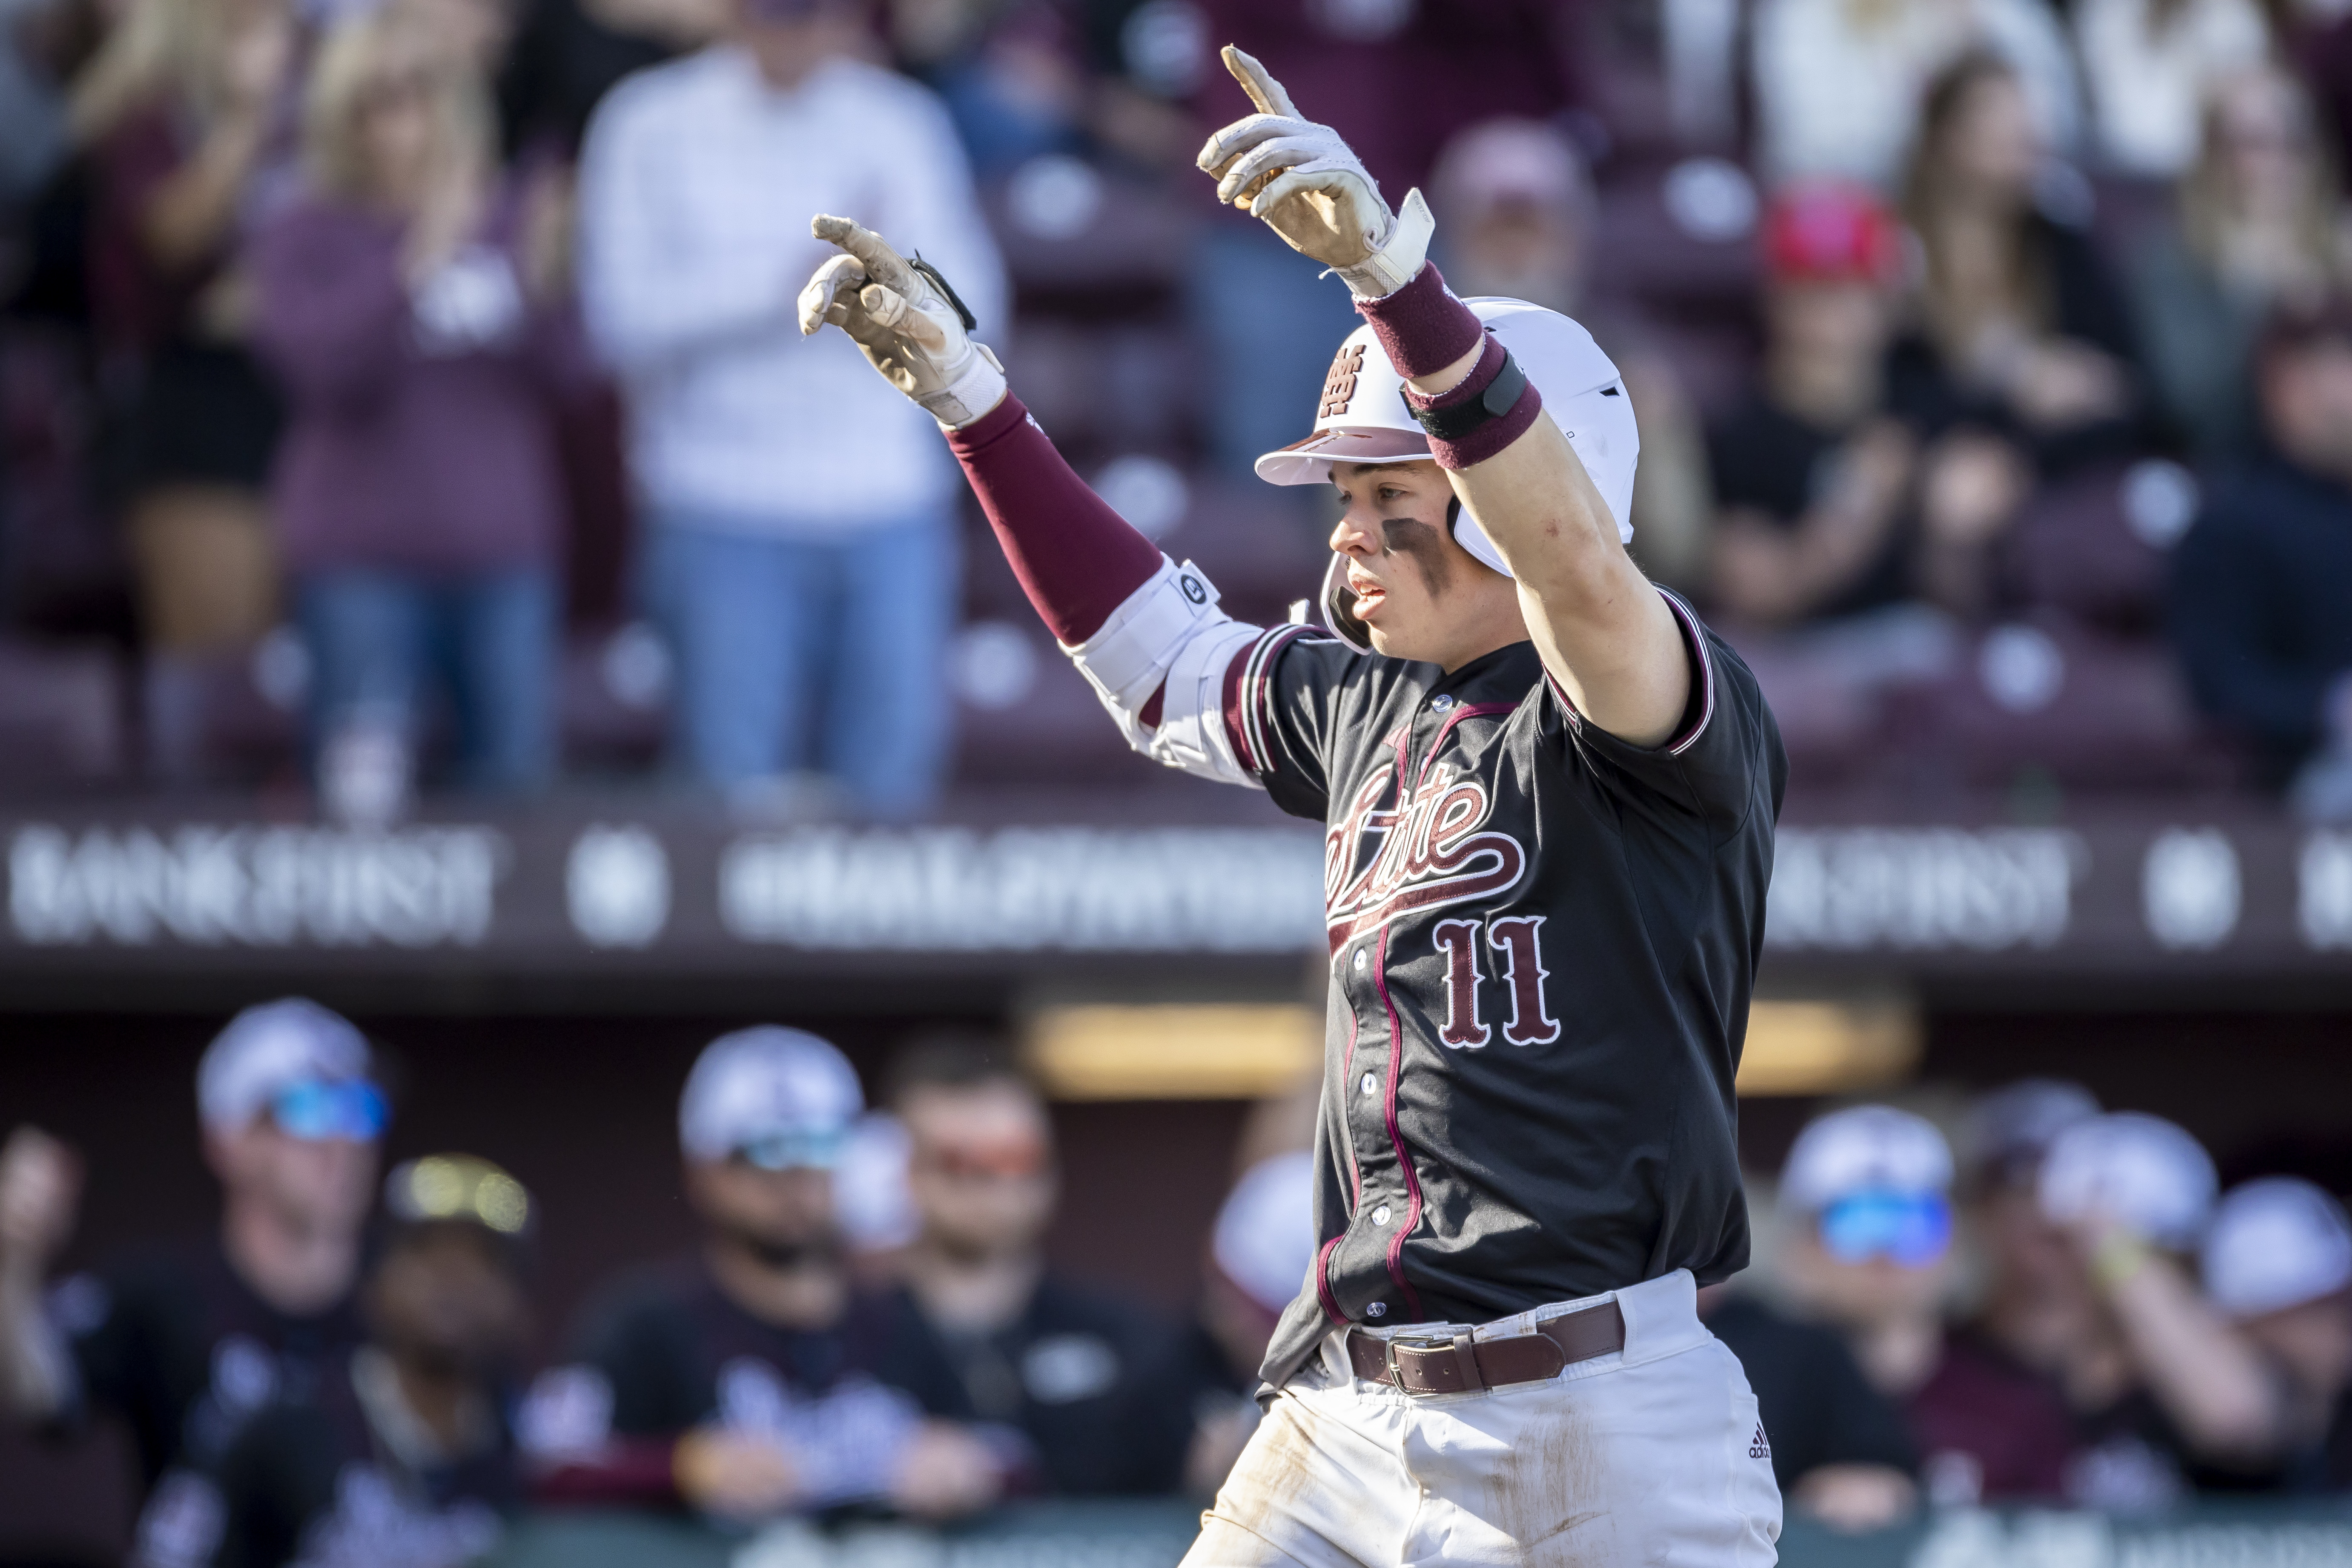 A look at former Mississippi State, MLB player Will Clark